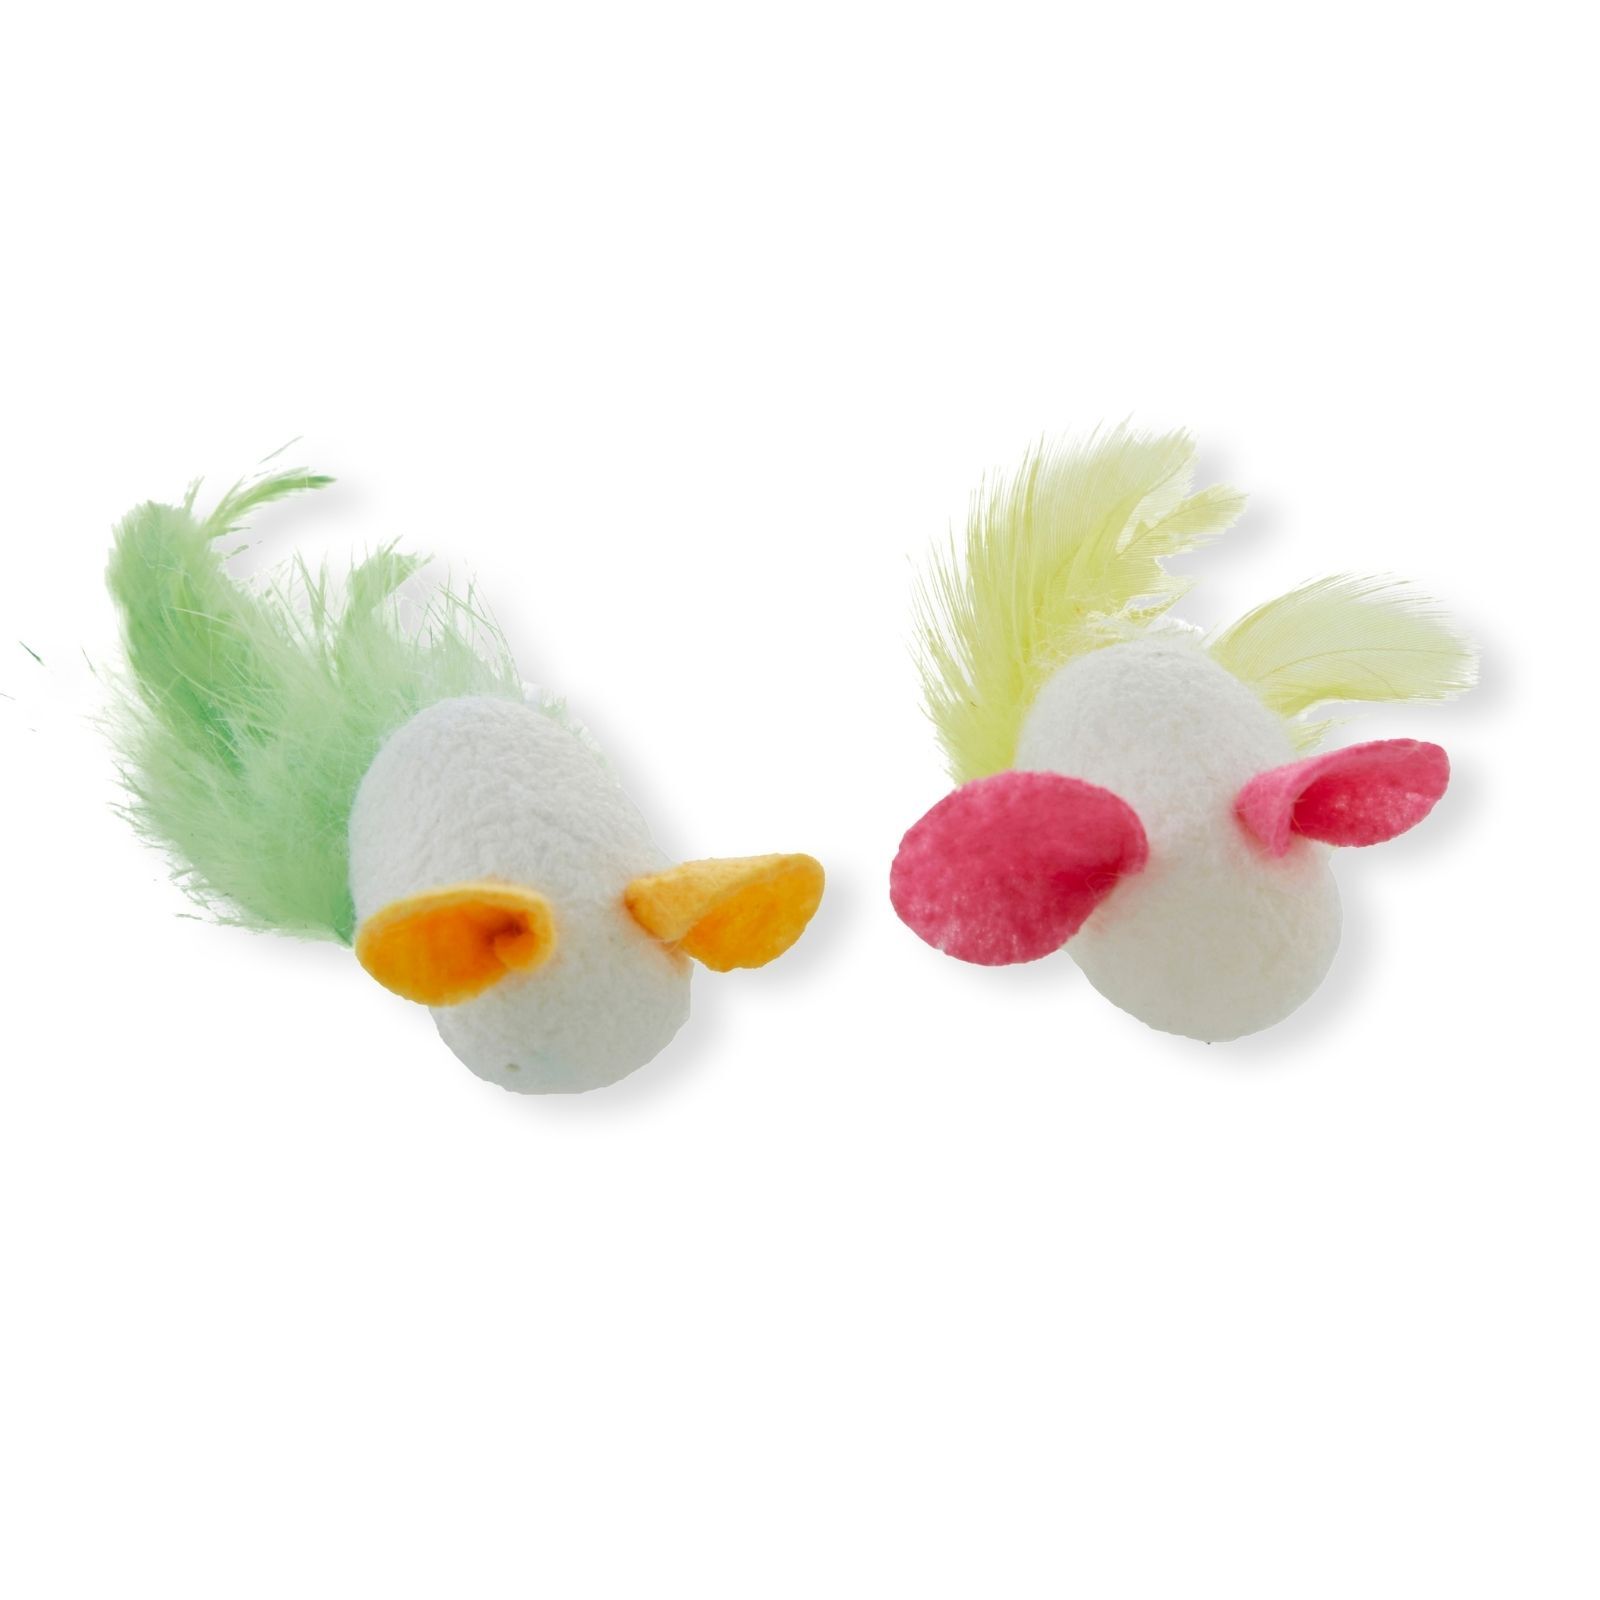 Flitters Wobble Mouse Cocoon Toys (Feather)